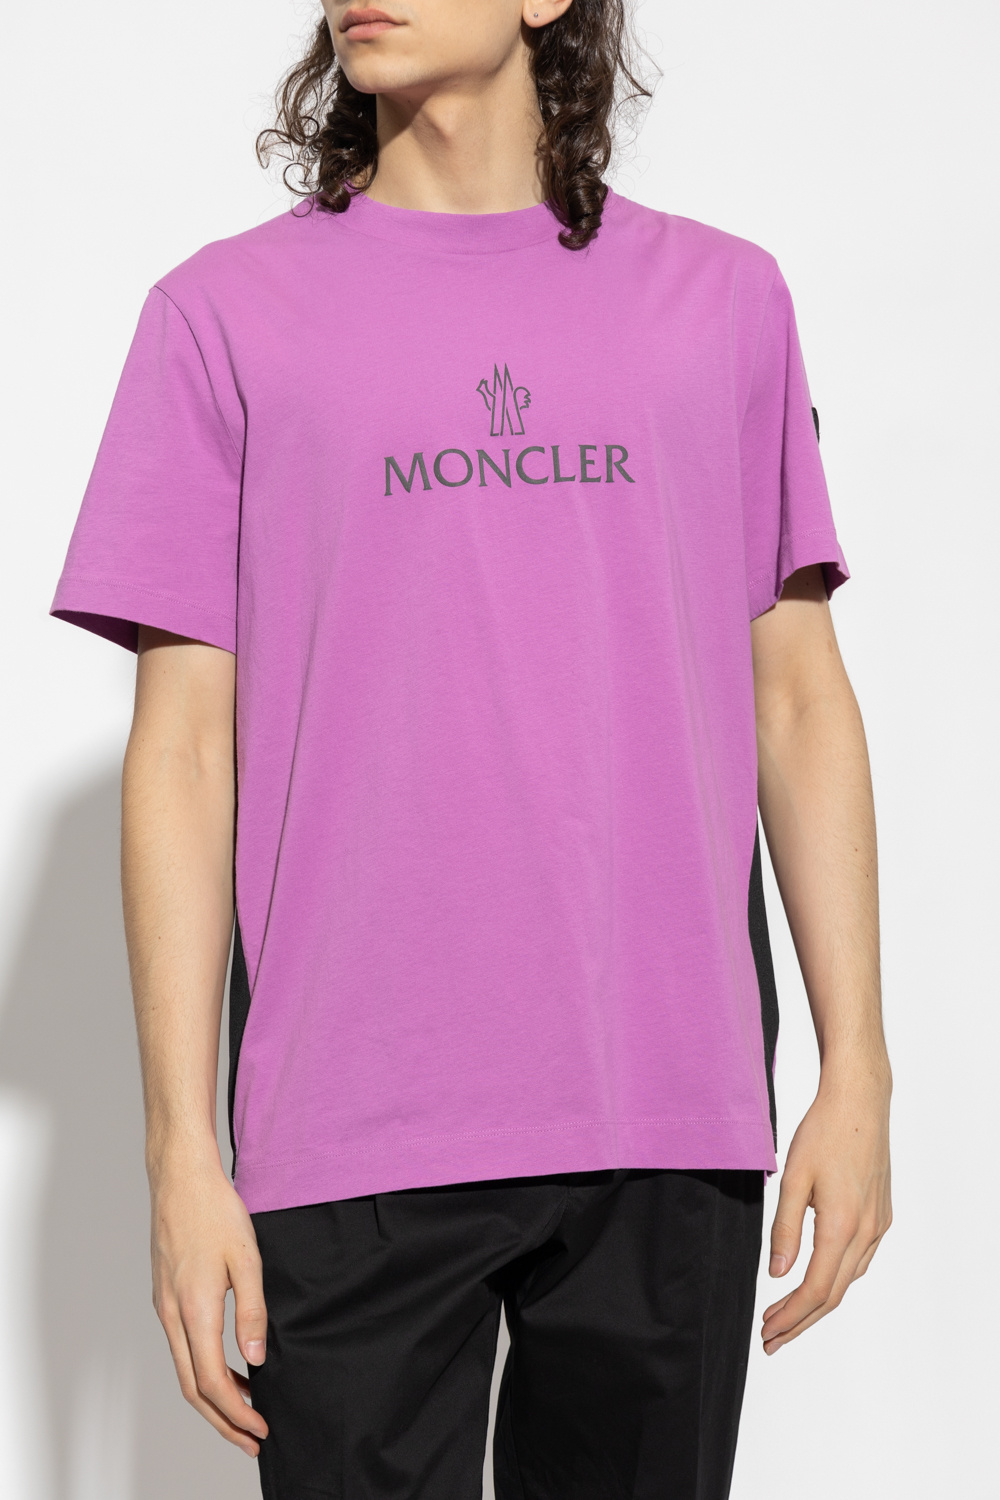 Moncler T-shirt Sleeved with reflective logo